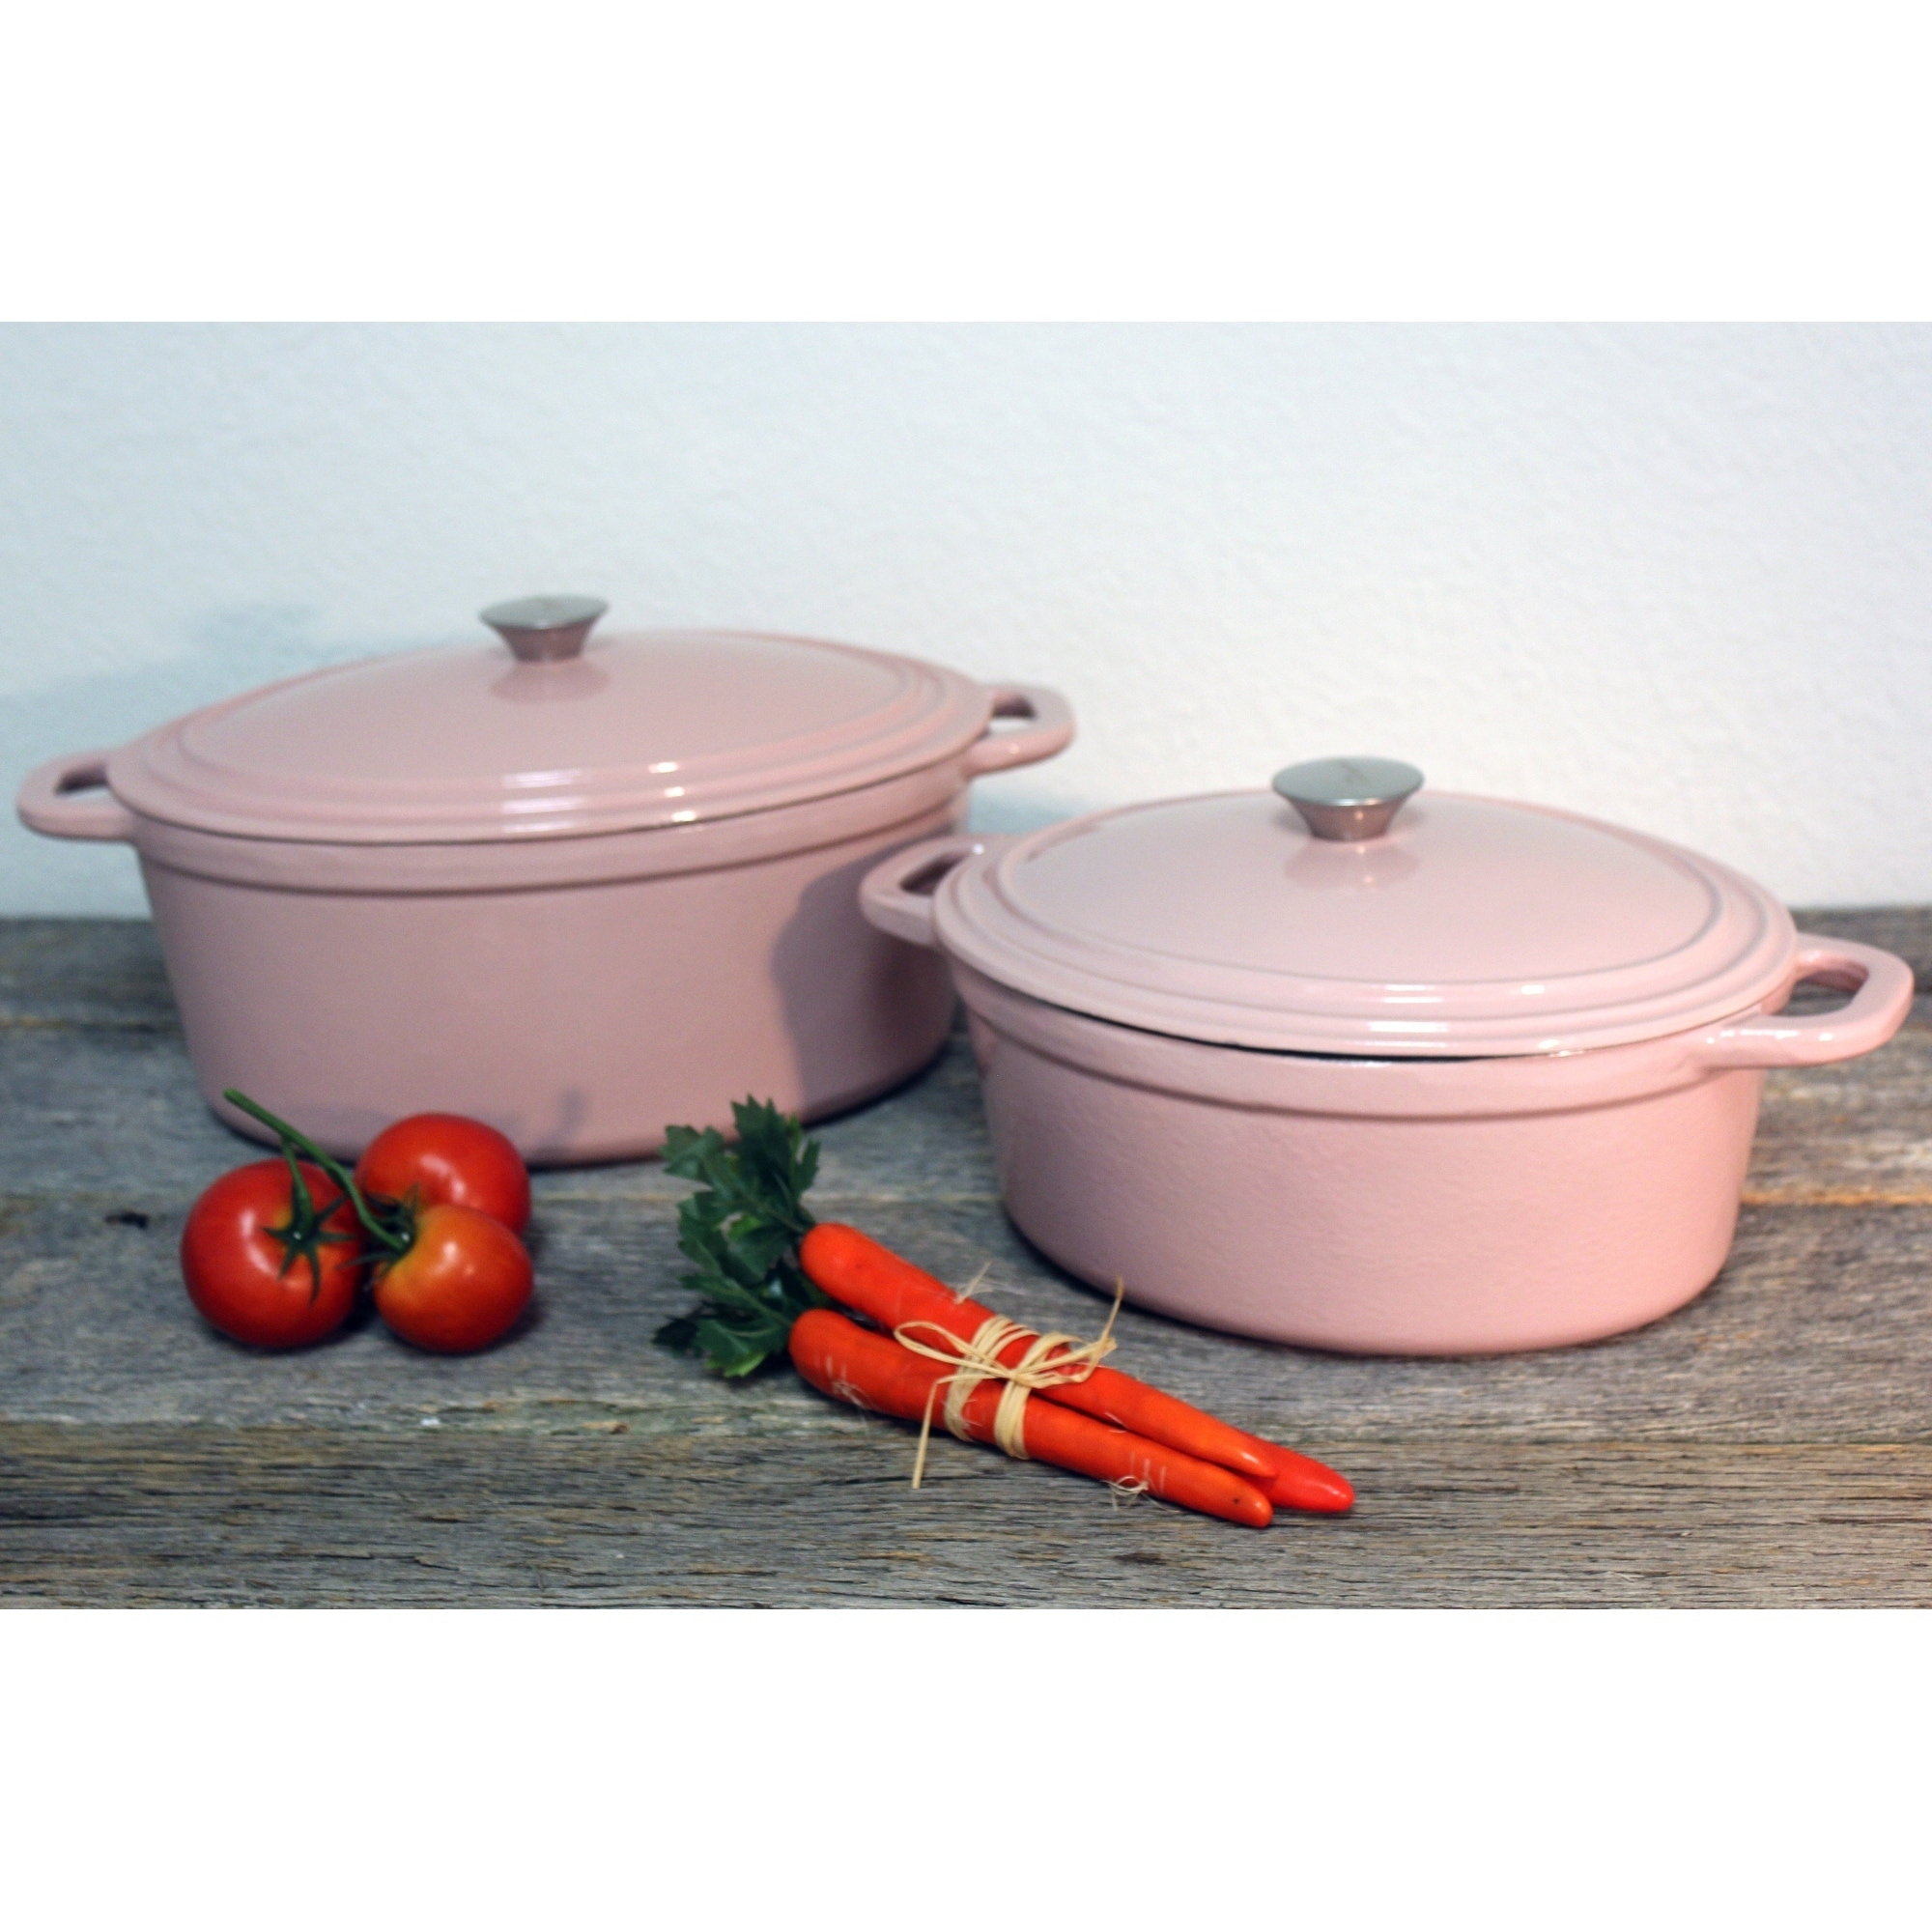 BergHOFF Neo Cast Iron Oval Covered Casserole Dish 5qt Pink